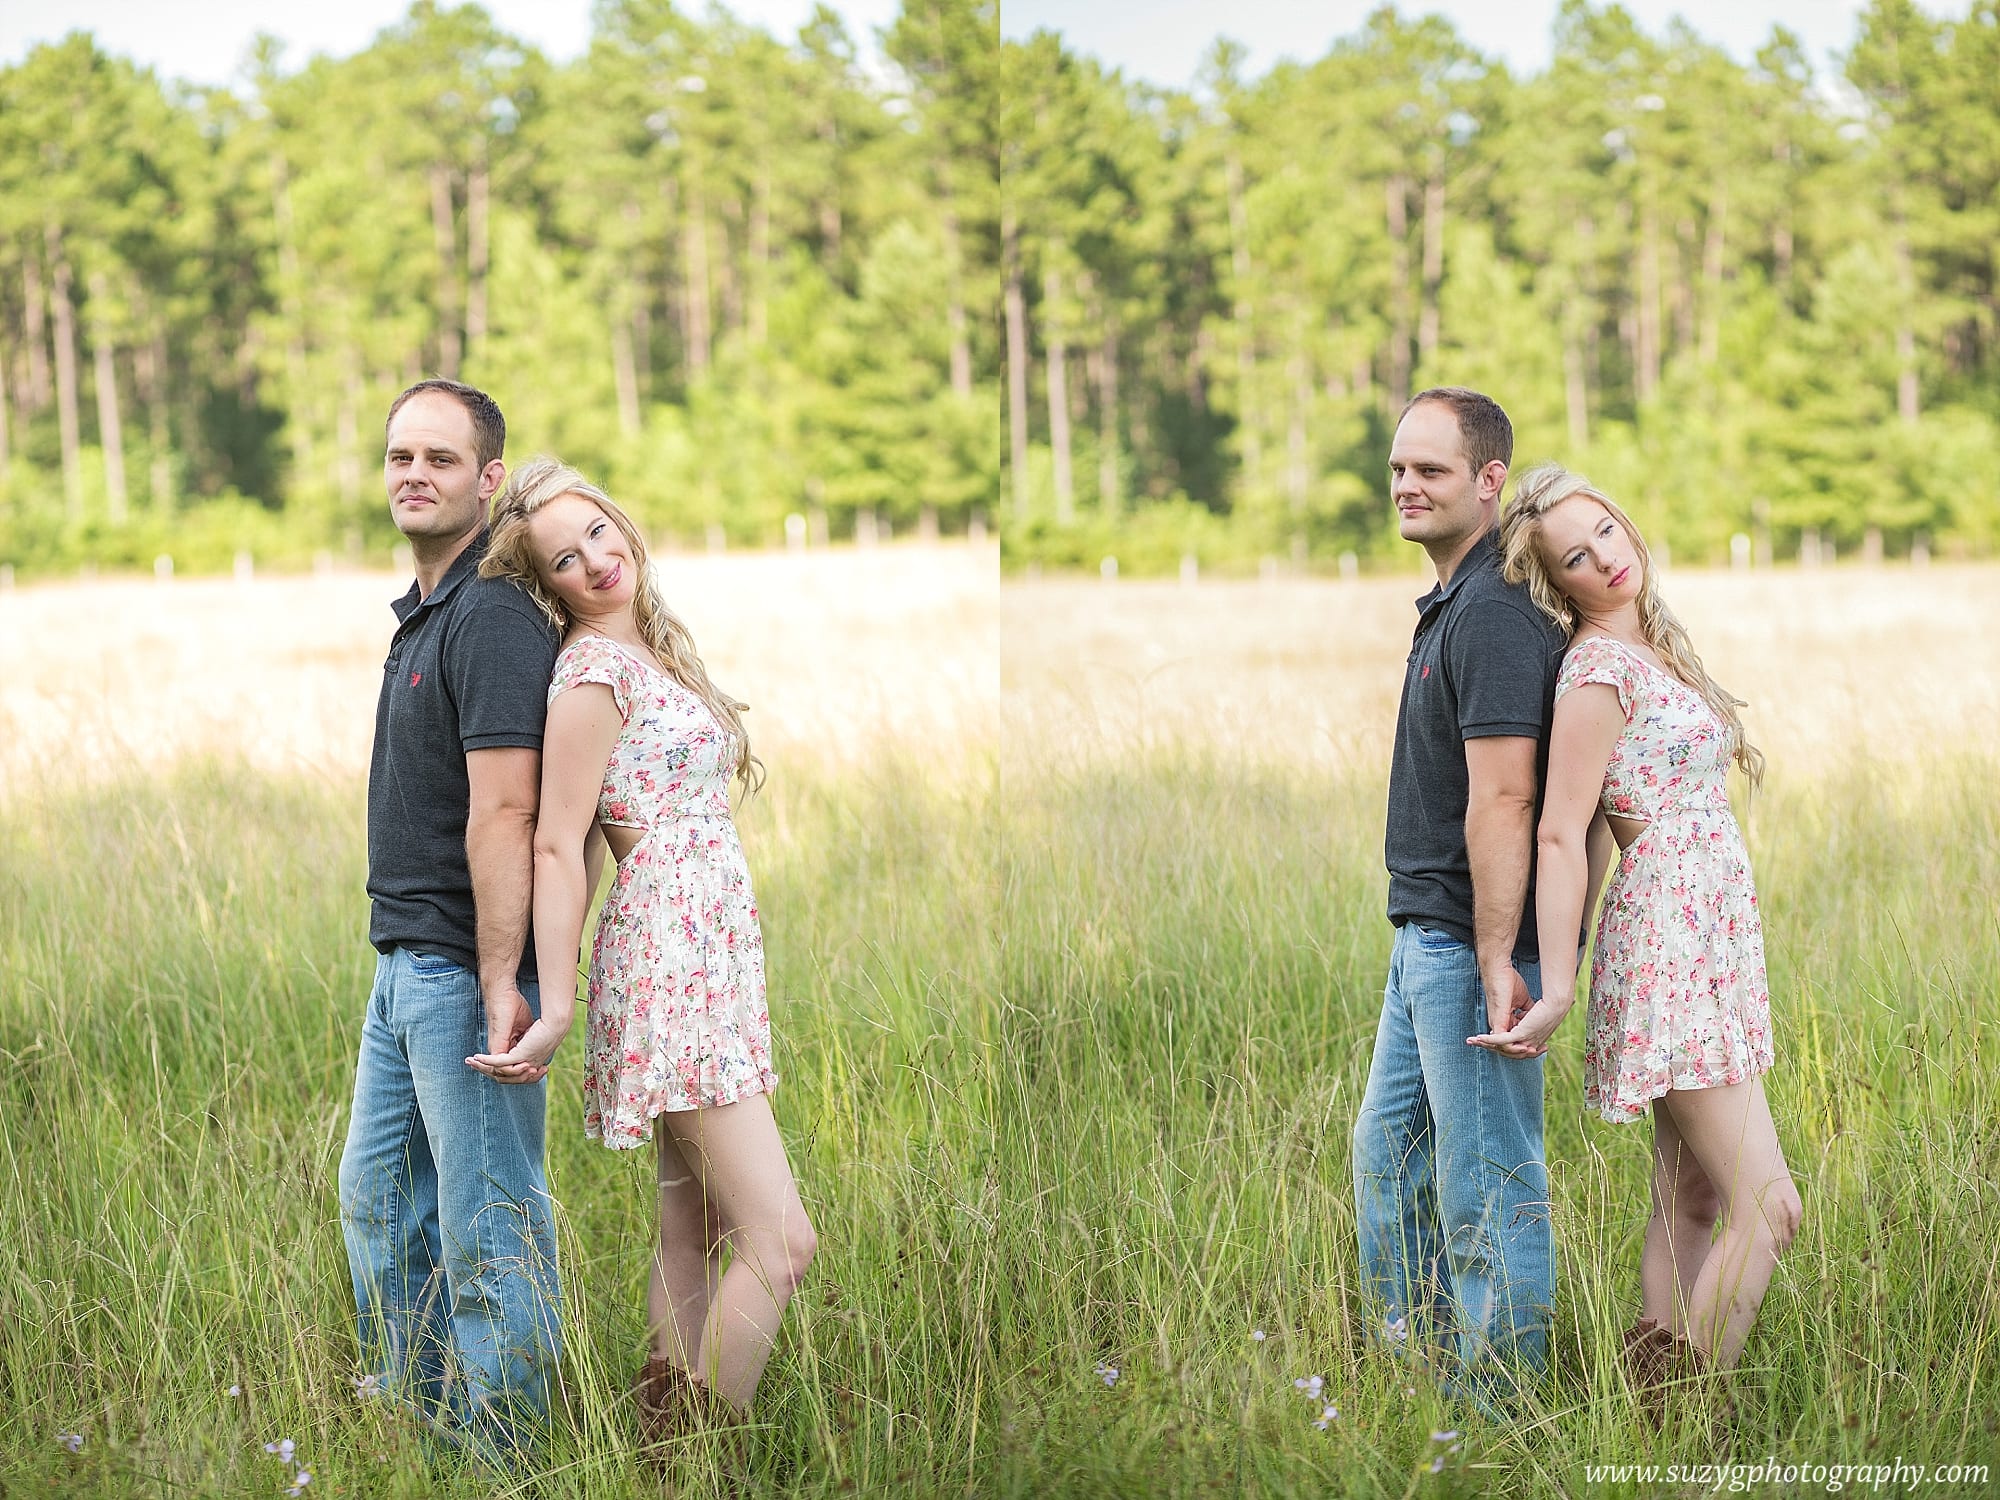 engagements-new orleans-texas-baton rouge-lake charles-suzy g-photography-suzygphotography_0013